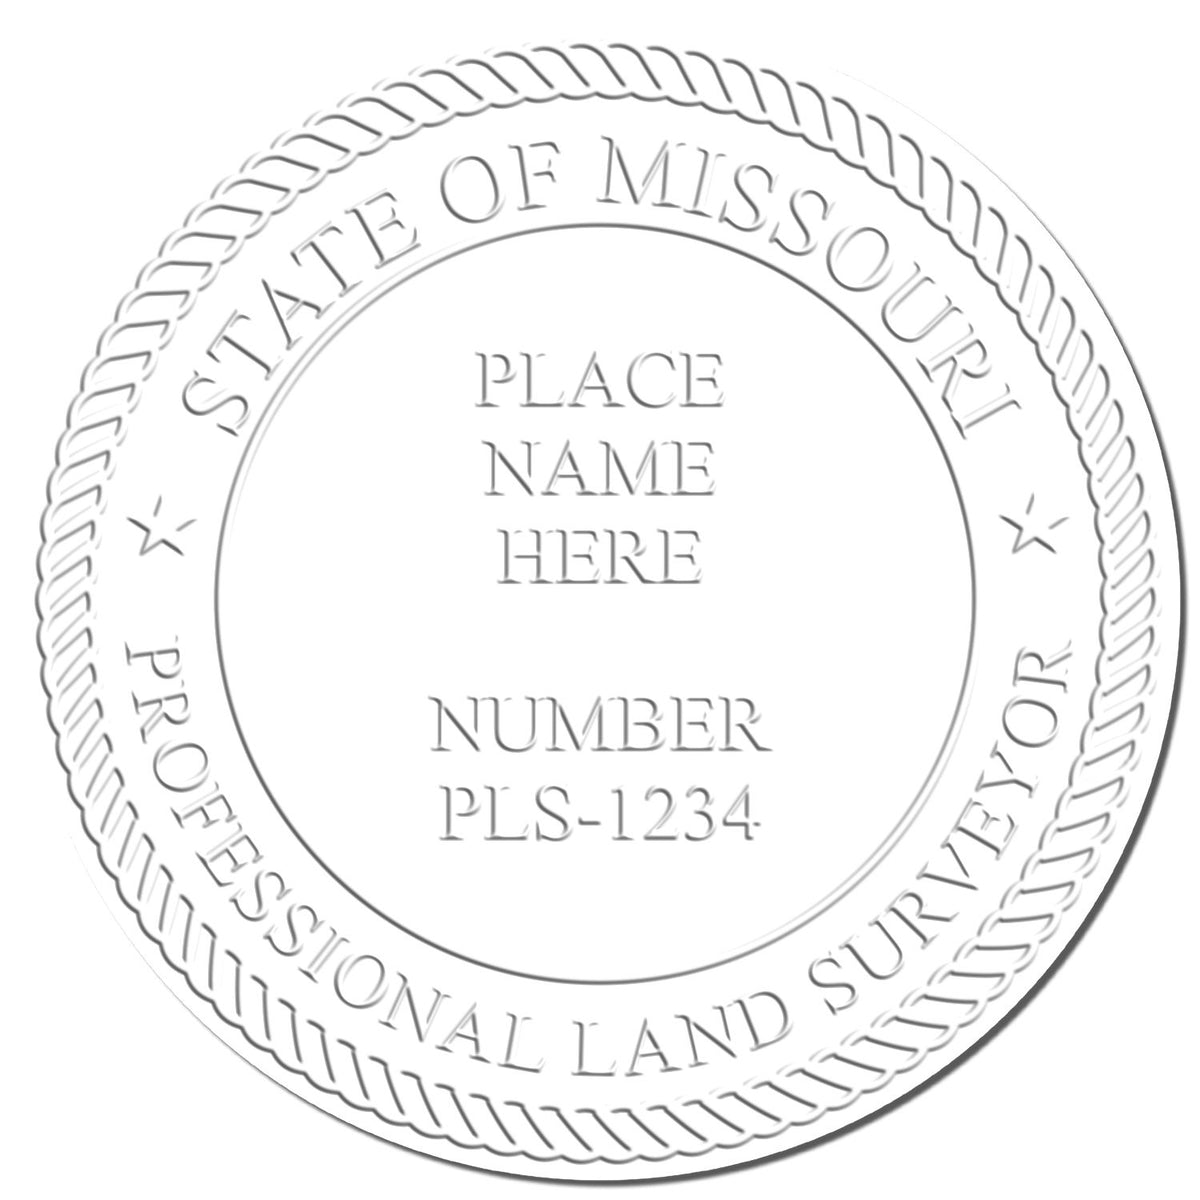 This paper is stamped with a sample imprint of the Heavy Duty Cast Iron Missouri Land Surveyor Seal Embosser, signifying its quality and reliability.